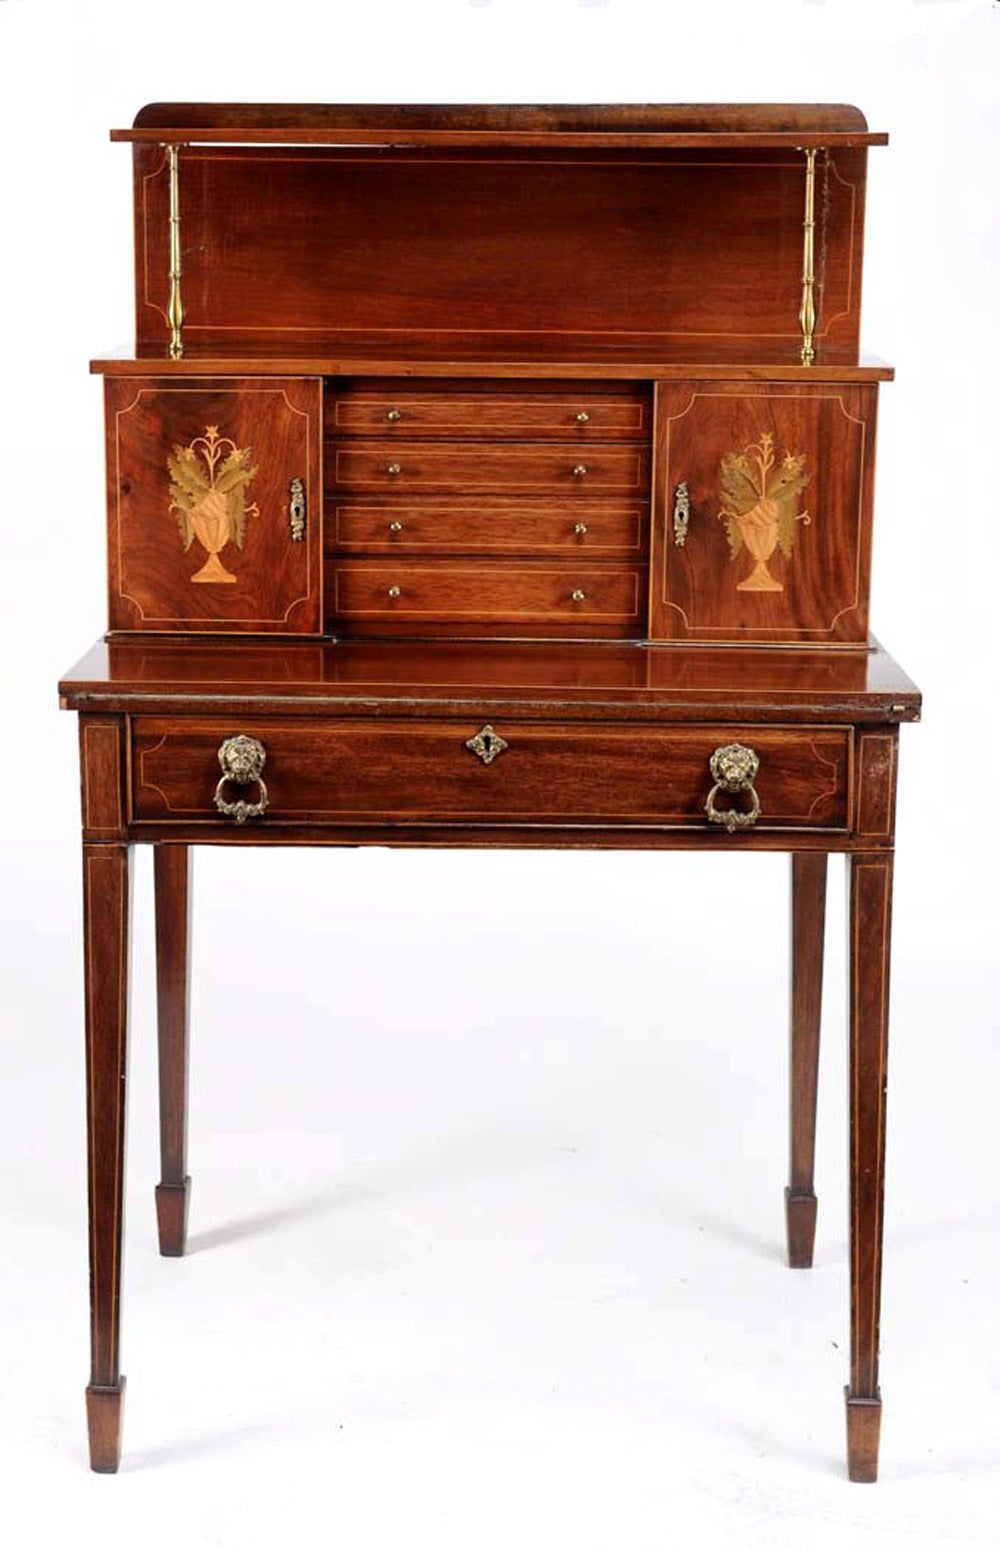 Fine Edwardian ladies desk or bonheur du jour with an unfolding leather lined writing surface supported by a drawer below it which bears two lion head brass pulls. There is fine inlay throughout and fine satinwood and holly marquetry on the front of